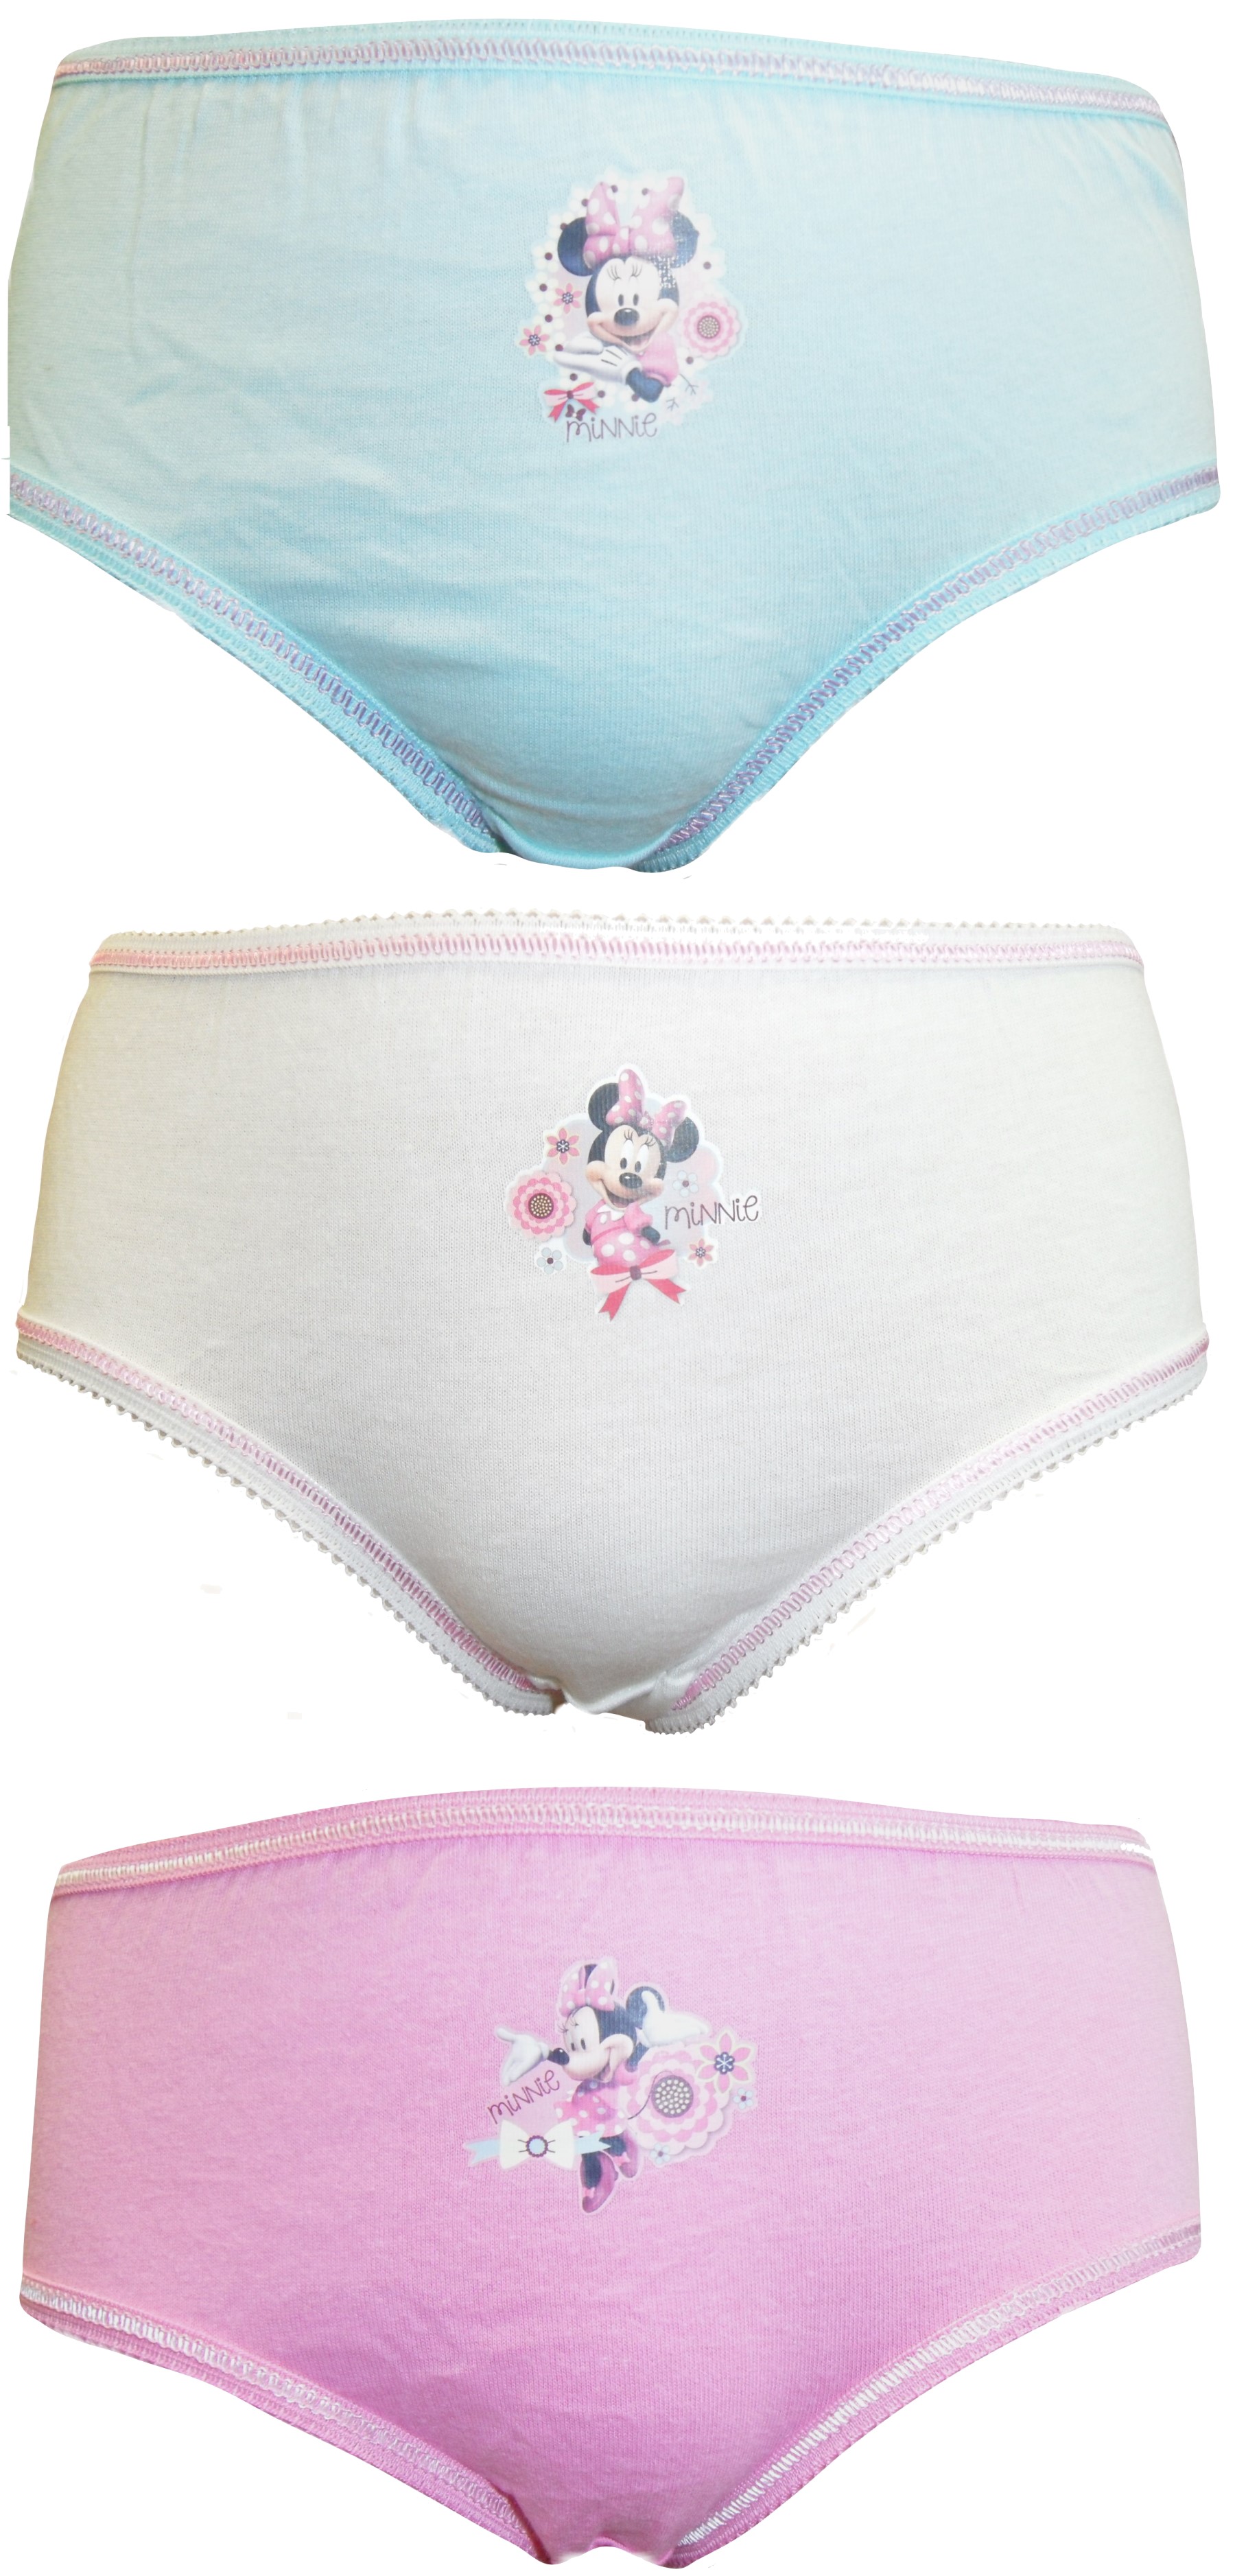 Minnie Mouse Knickers GUW16 a.JPG  by Thingimijigs